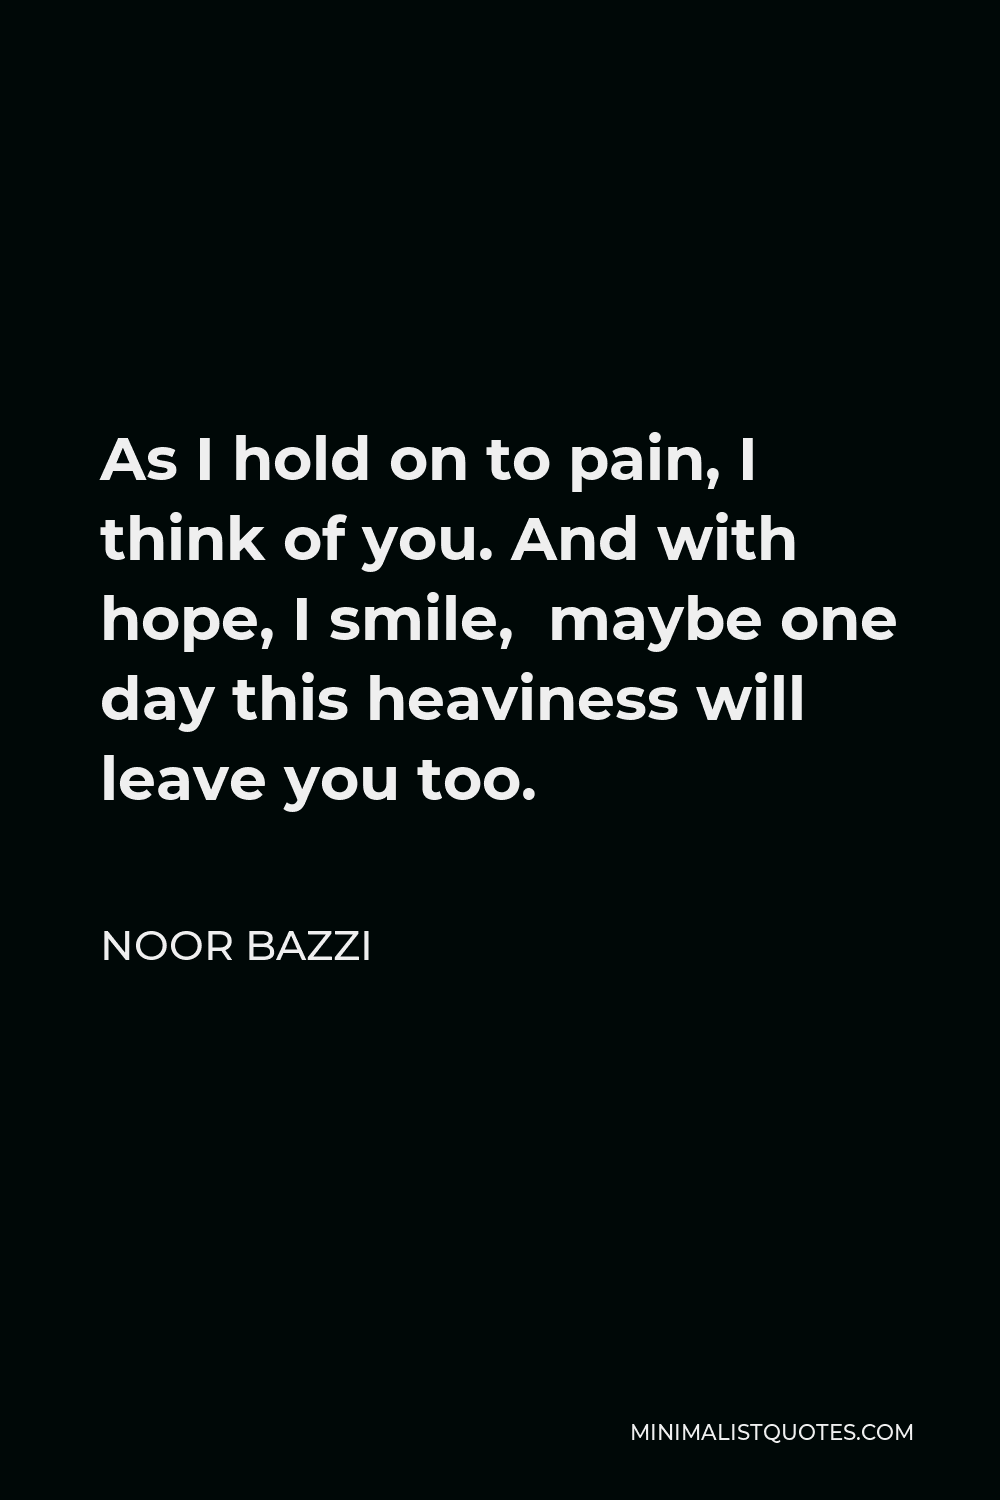 Noor Bazzi Quote - As I hold on to pain, I think of you. And with hope, I smile,  maybe one day this heaviness will leave you too.